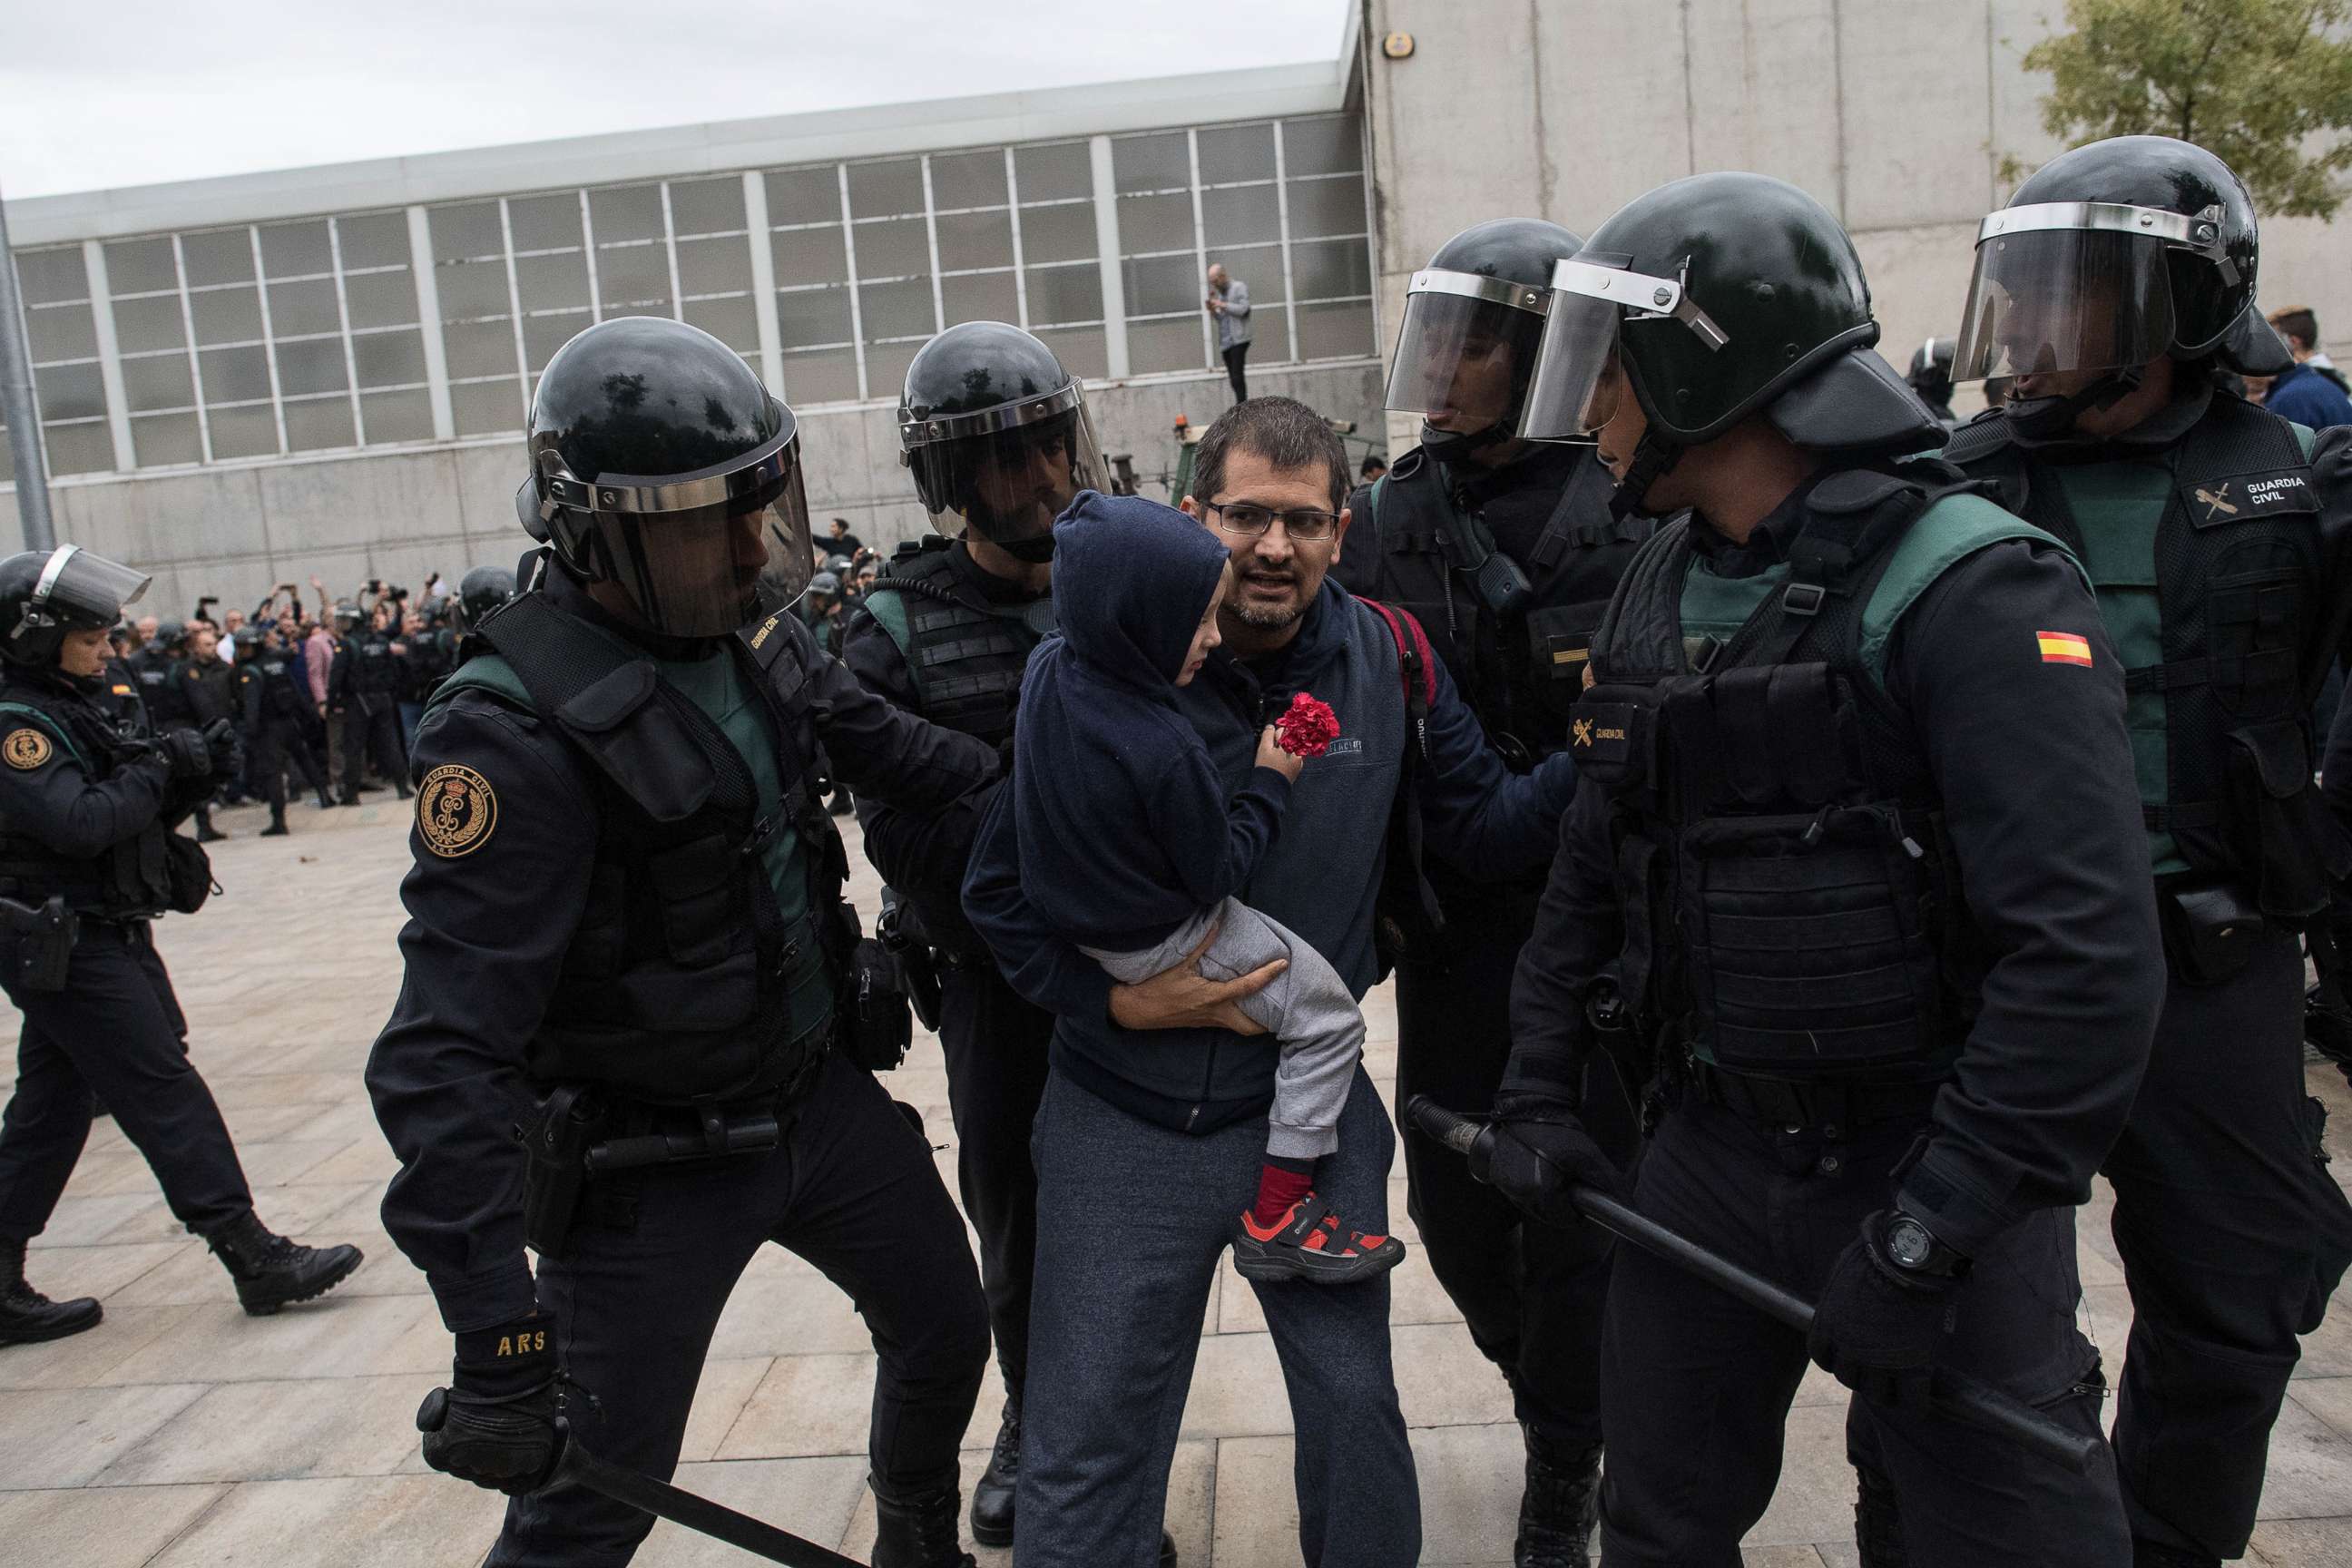 PHOTO: A man and a child holding a red flower run from the police as they move in on the crowds, Oct. 1, 2017 in Sant Julia de Ramis, Spain. 